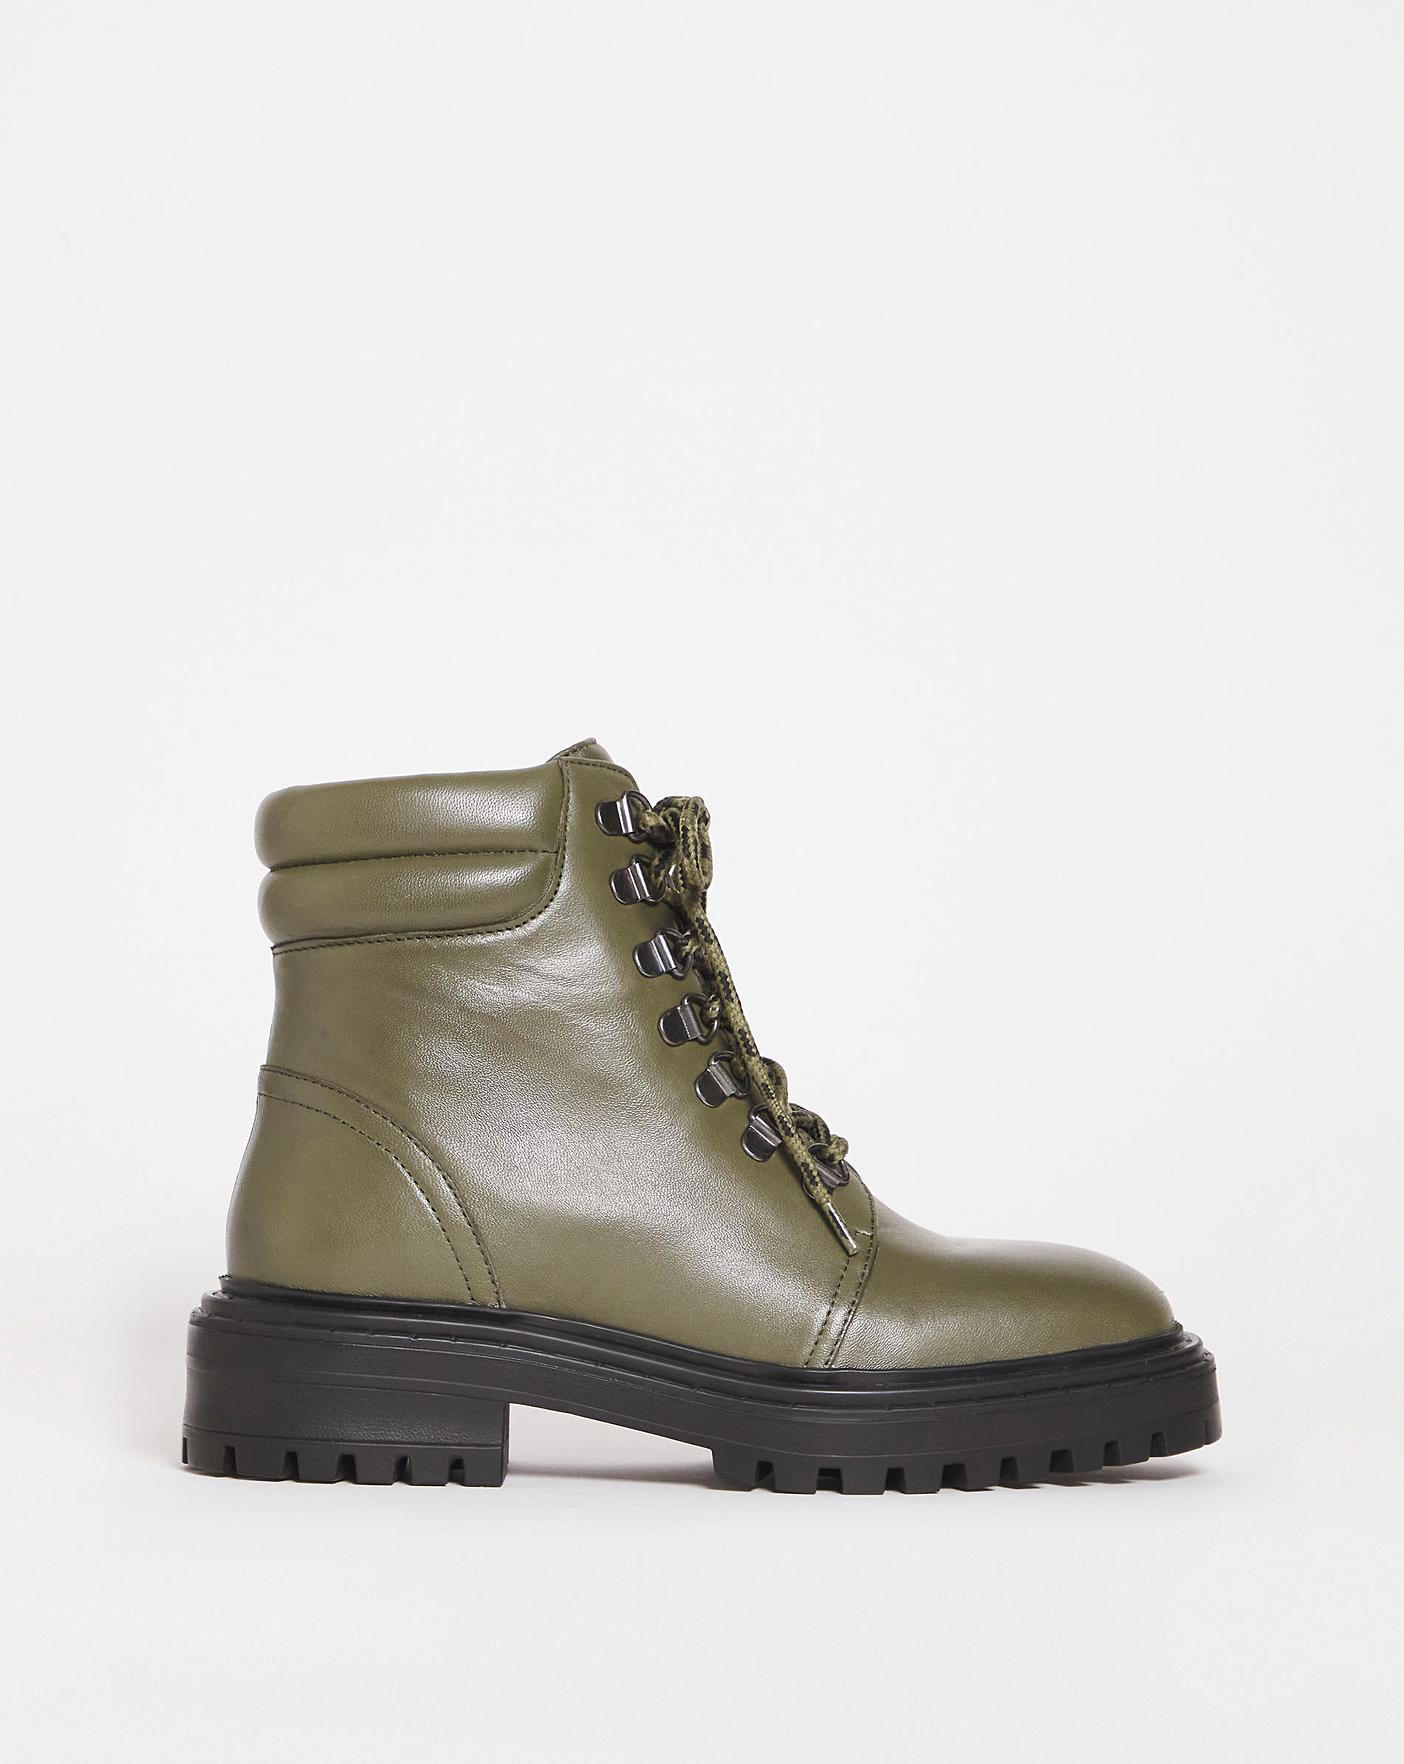 Leather Hiker Style Boot E Fit | J D Williams